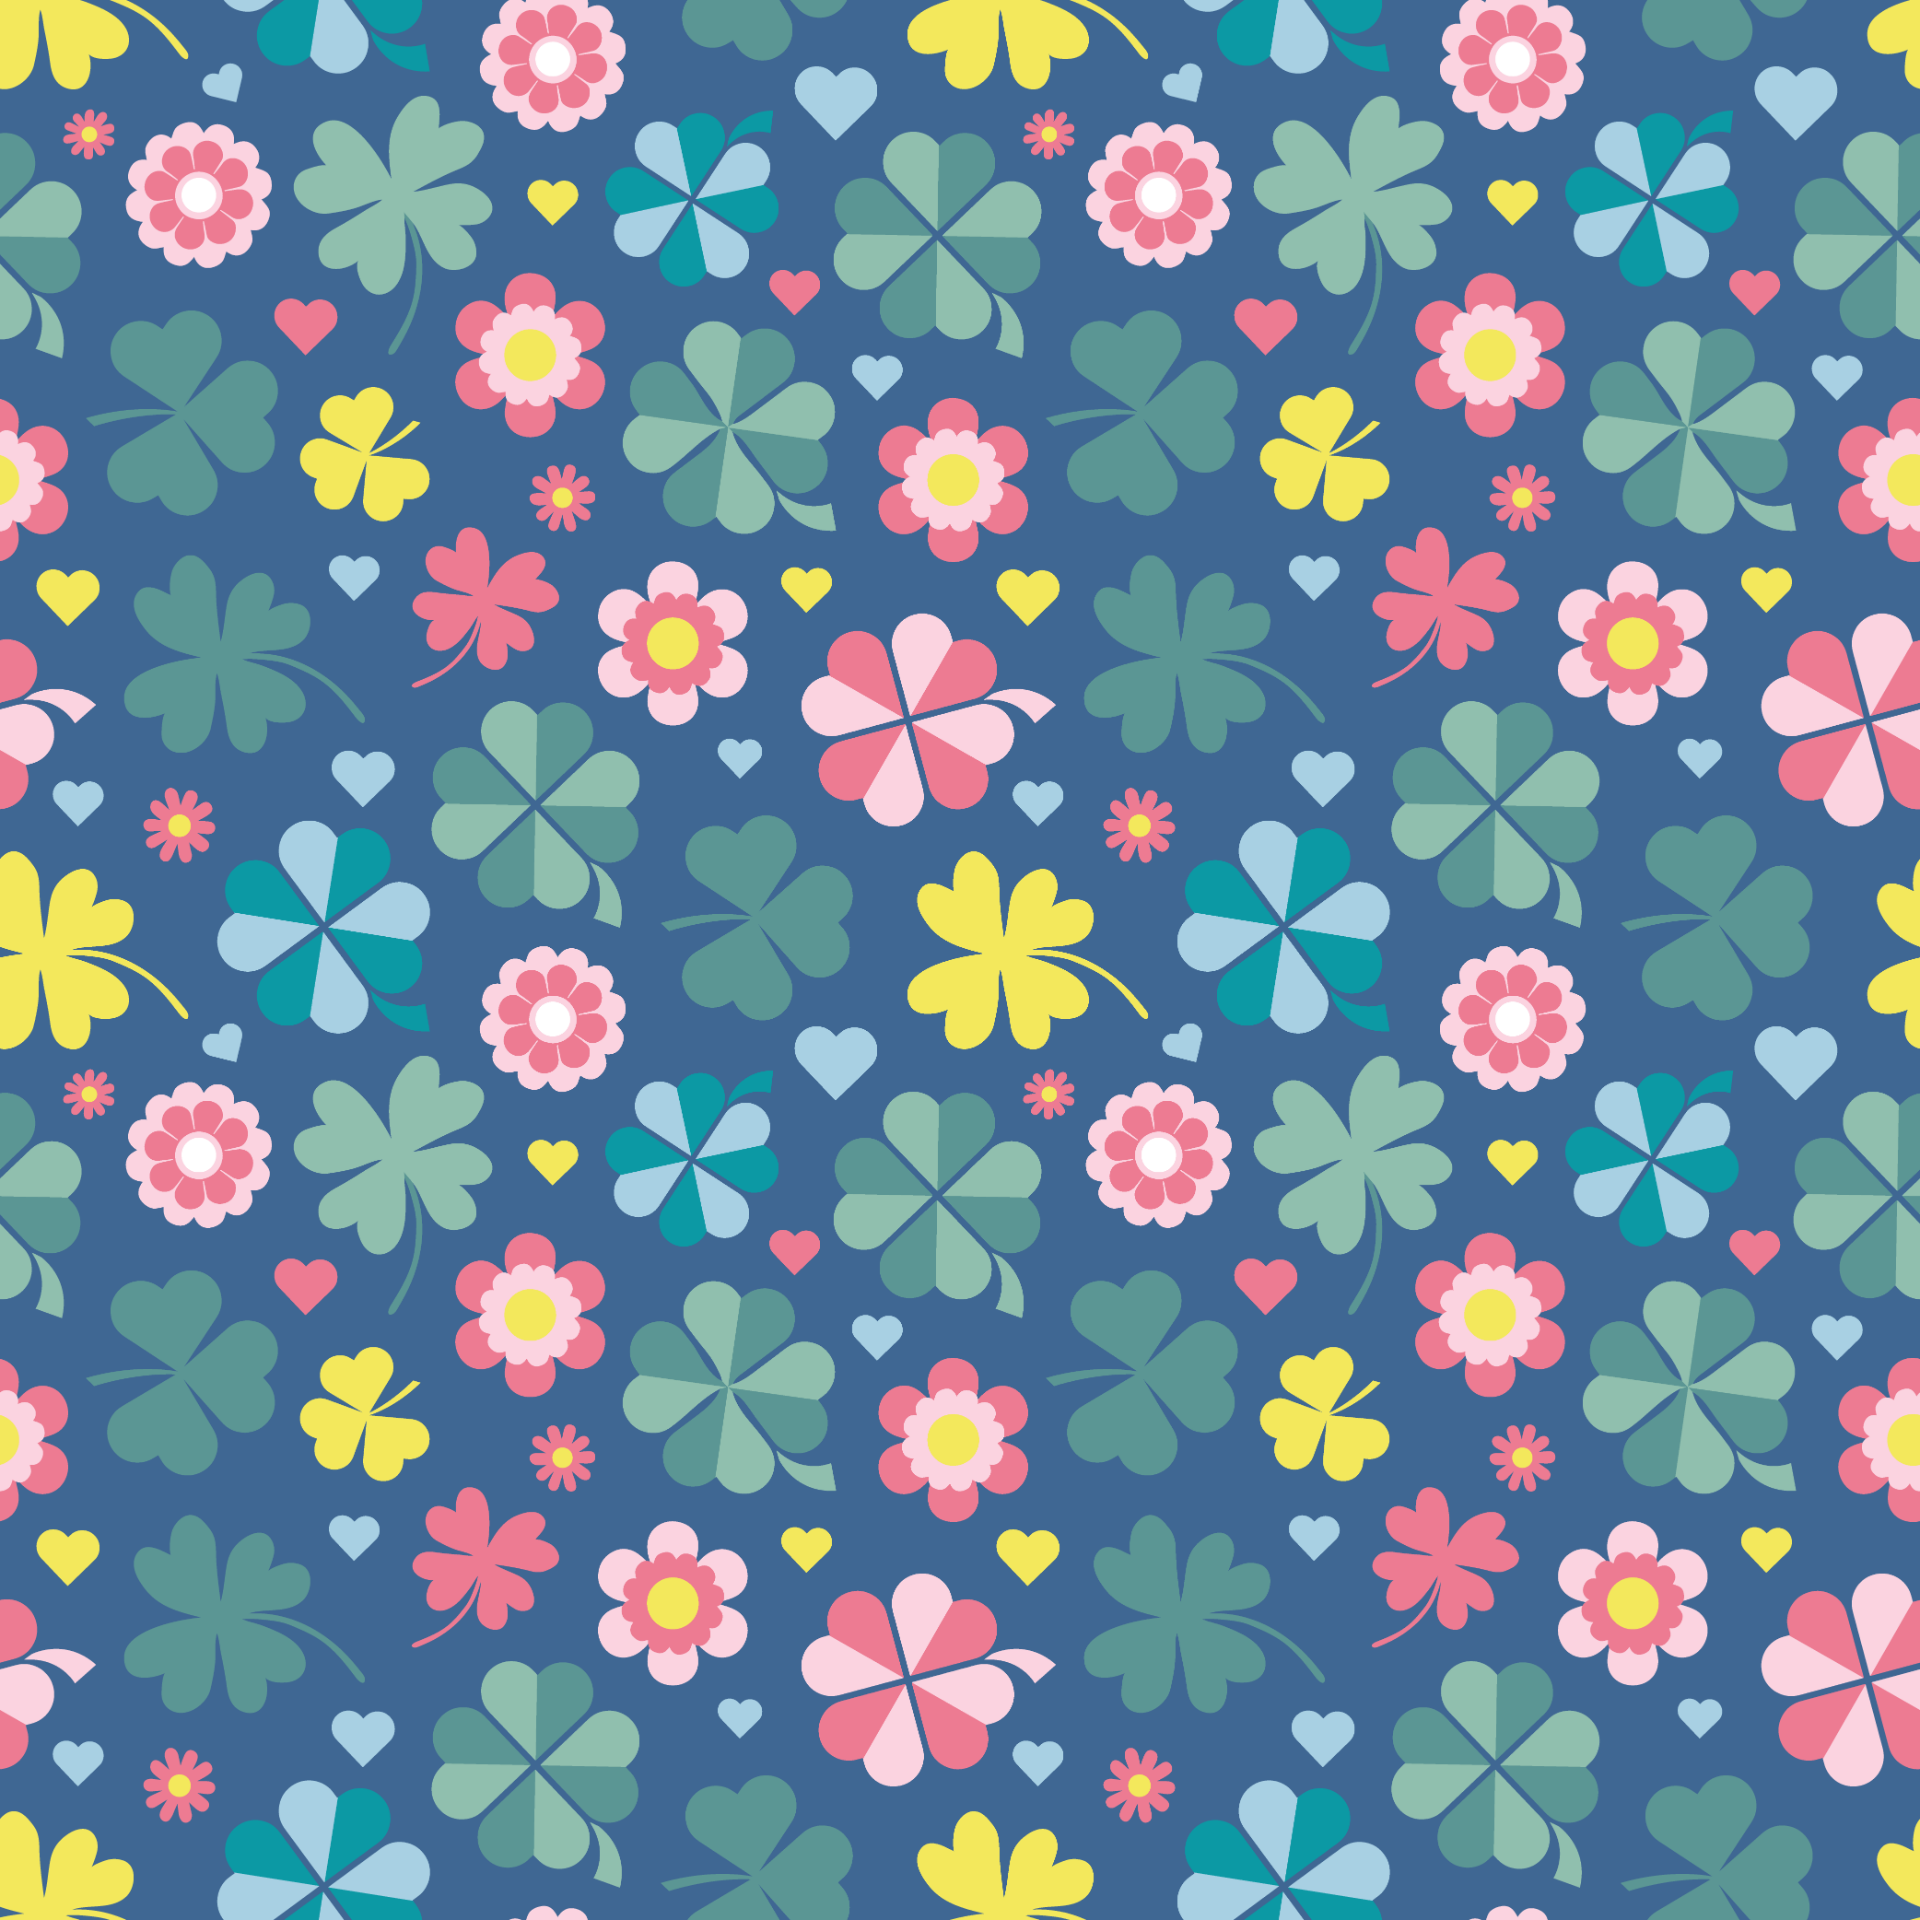 ColorfulCloverLeaves_1000x1000px